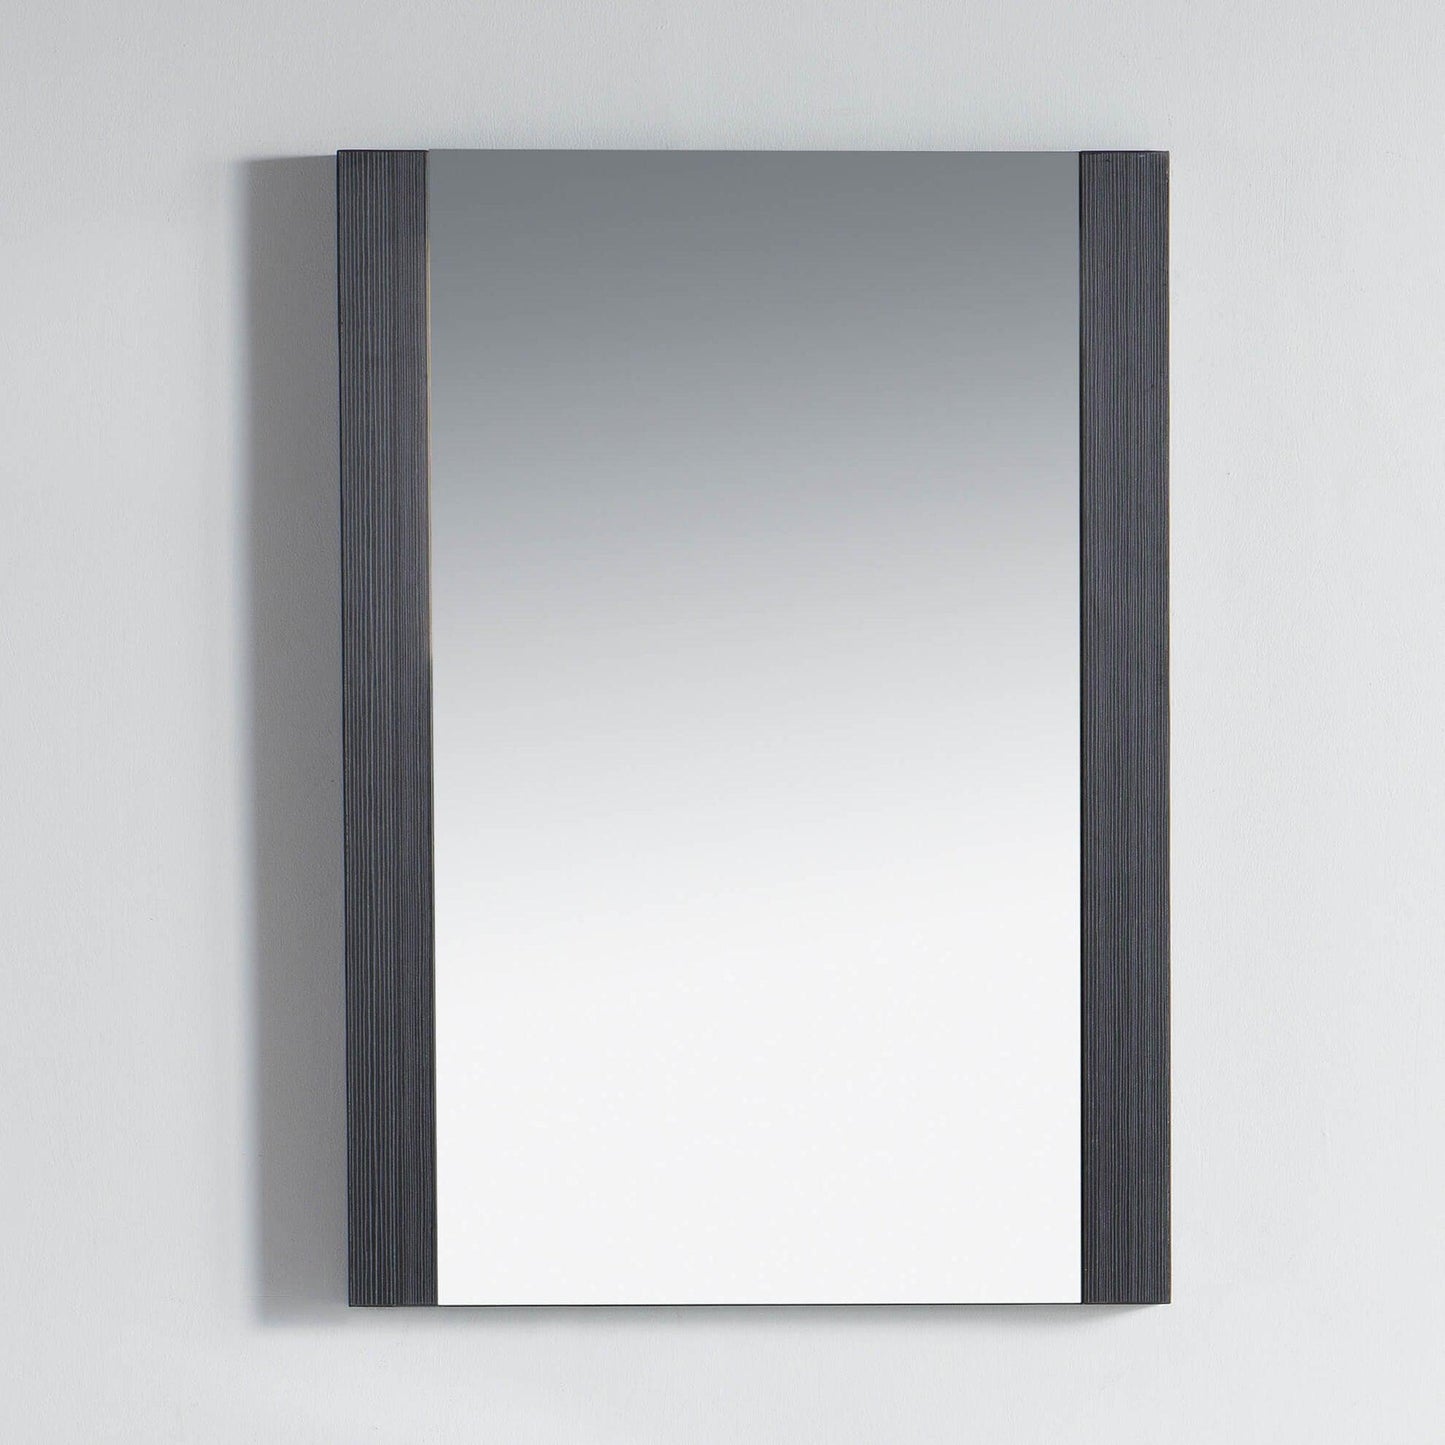 Blossom Milan 20" x 32" Silver Gray Wall-Mounted Rectangle Mirror